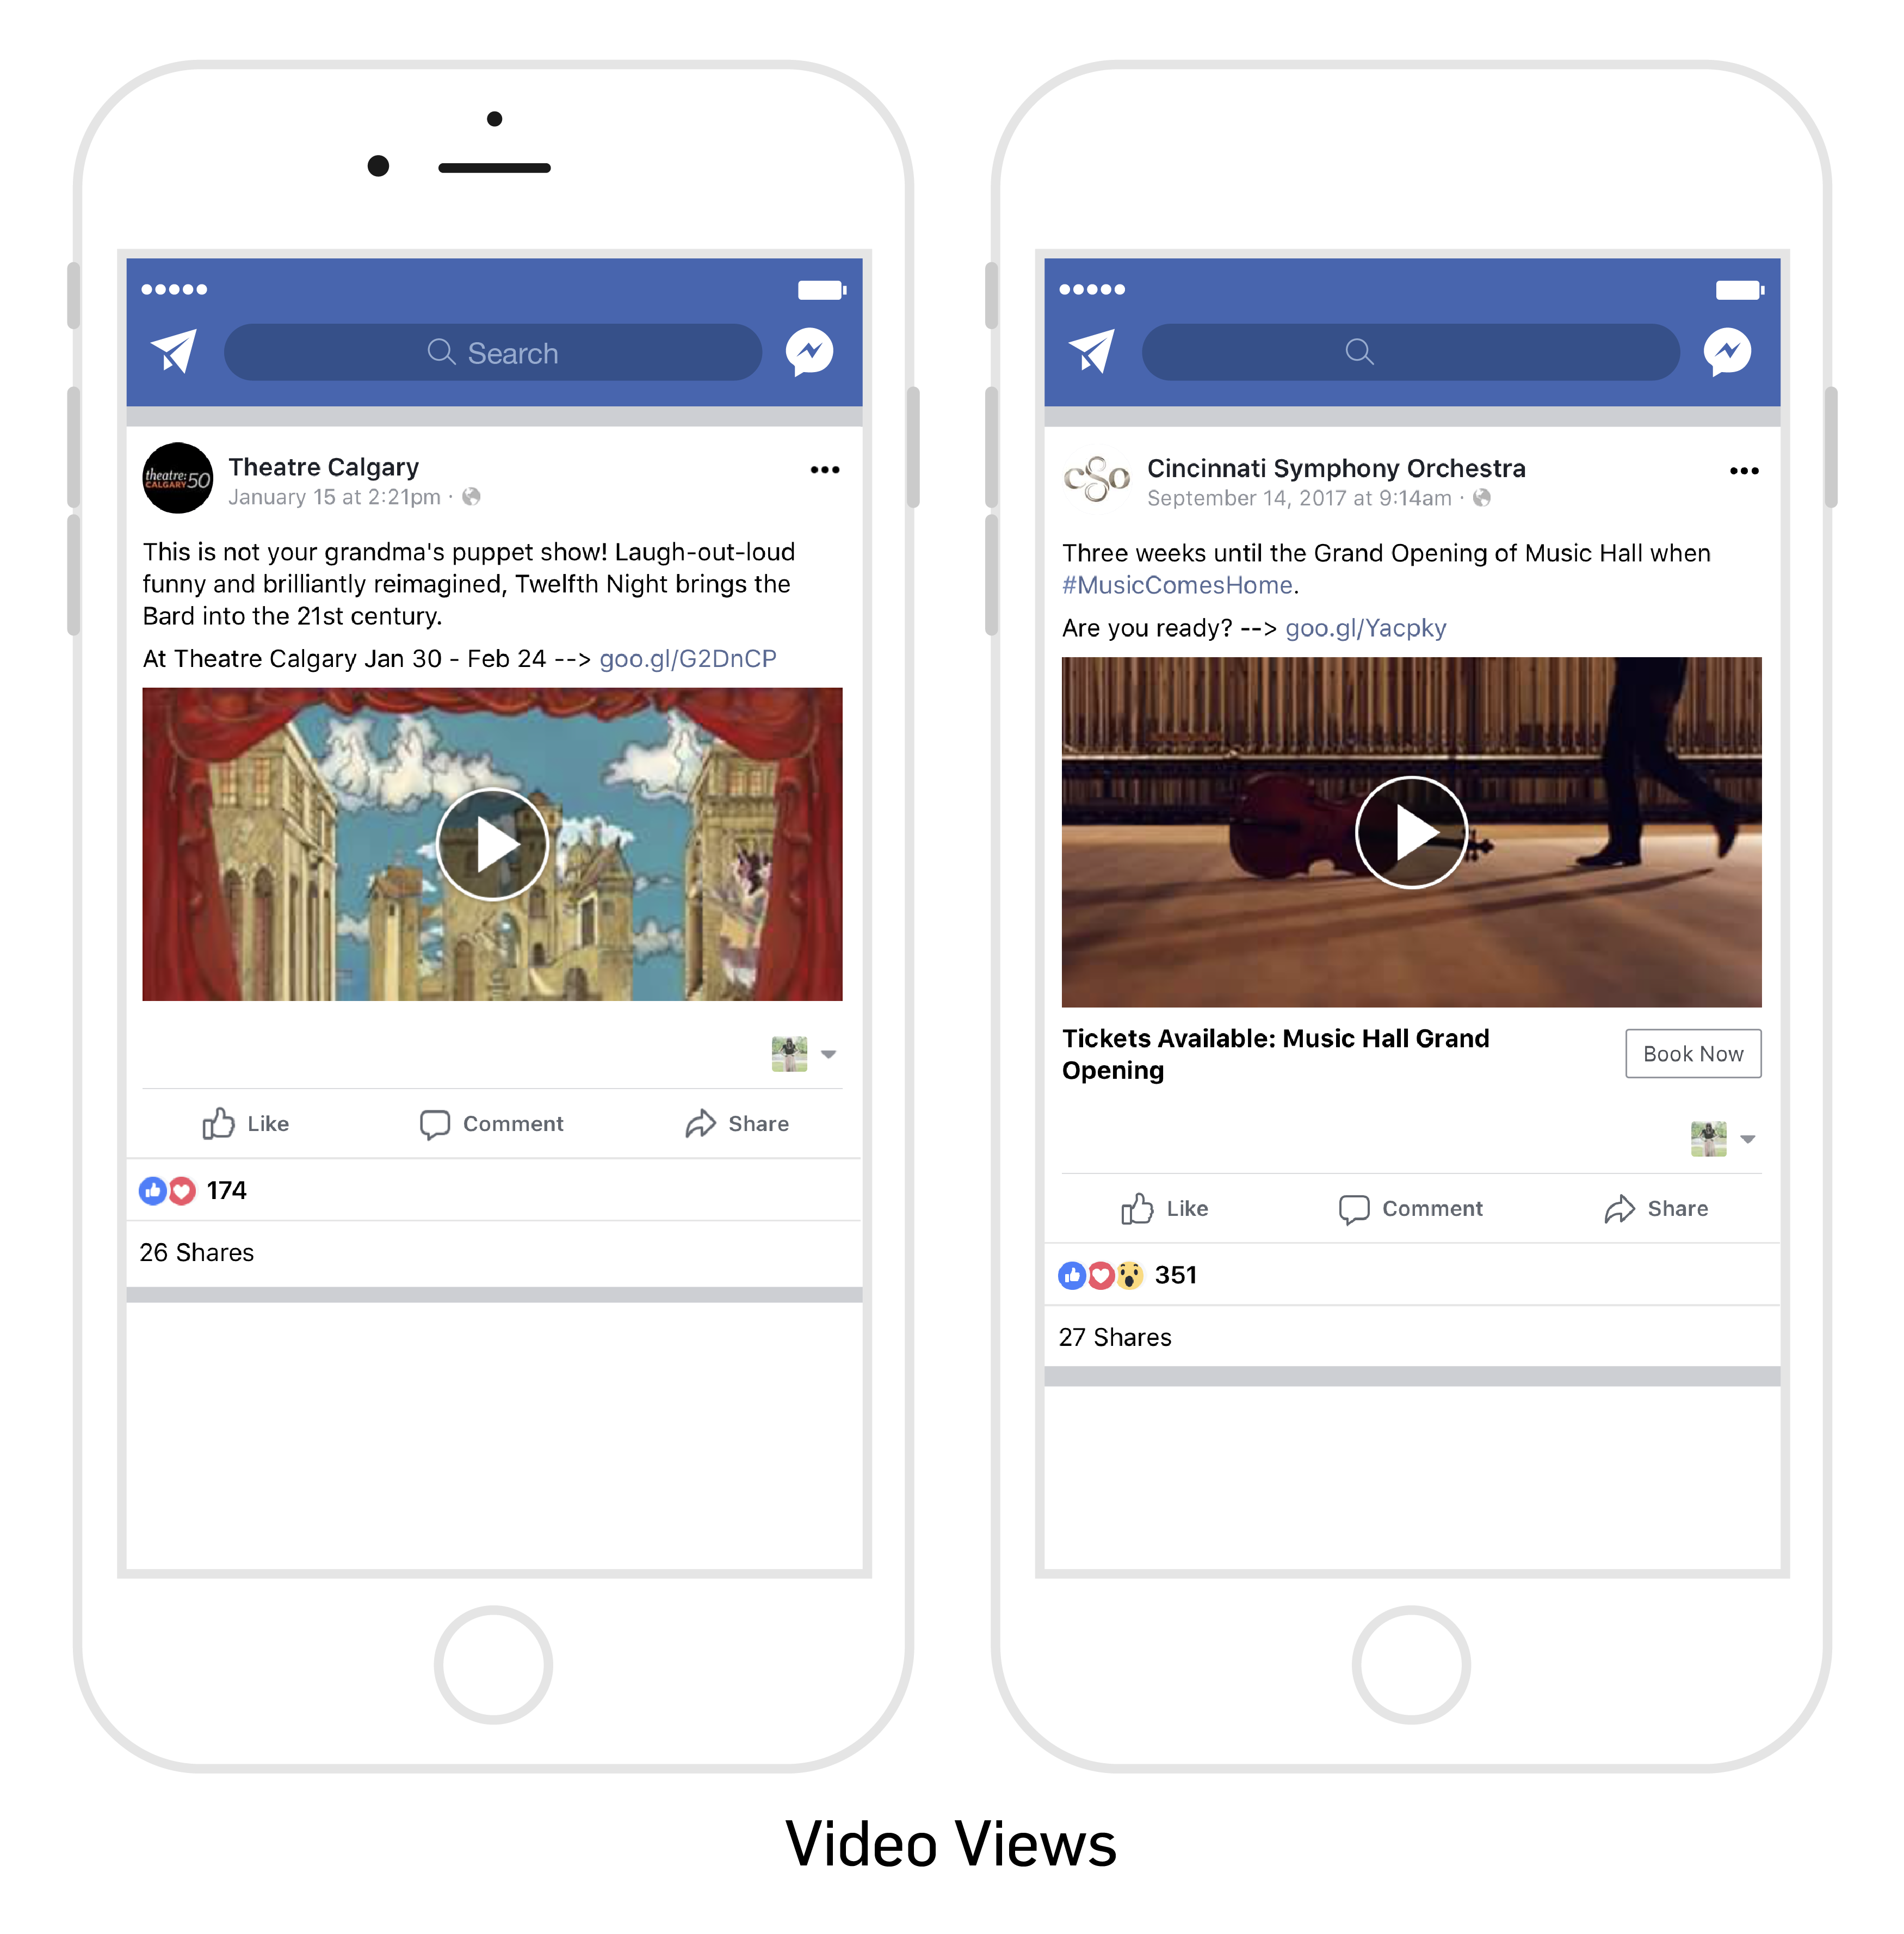 Image with mobile phone examples of "Video Views"